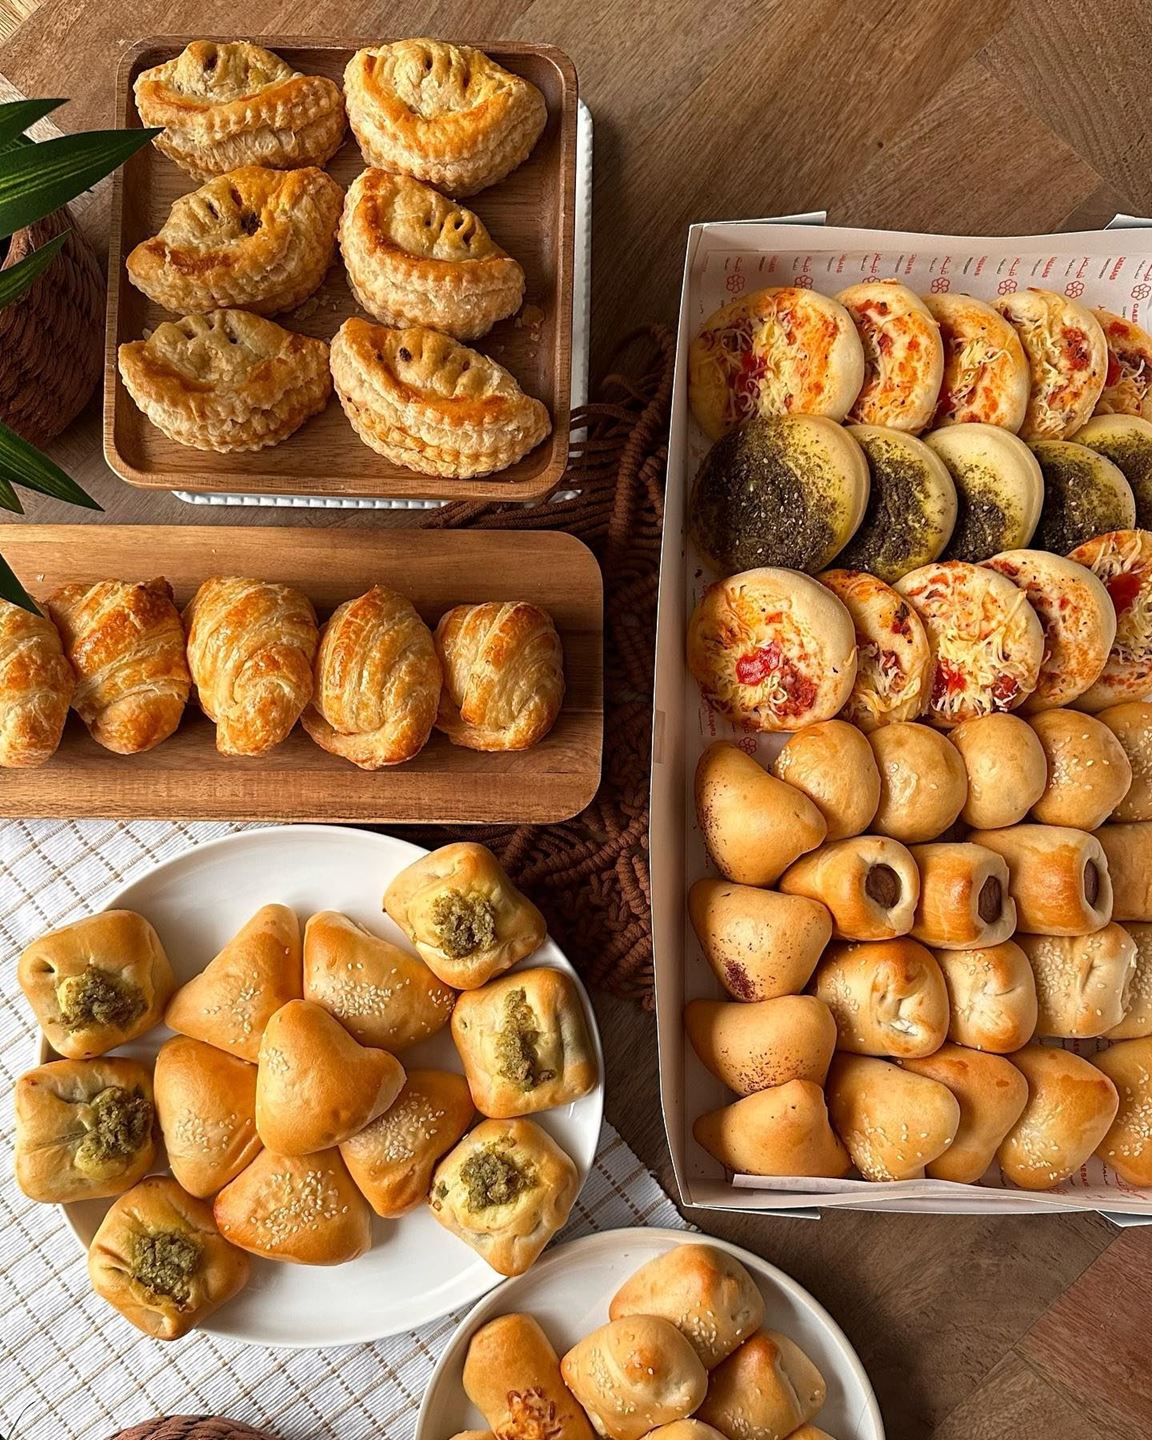 Where to order Amazing Pastries for Occasions and Gatherings in Kuwait?